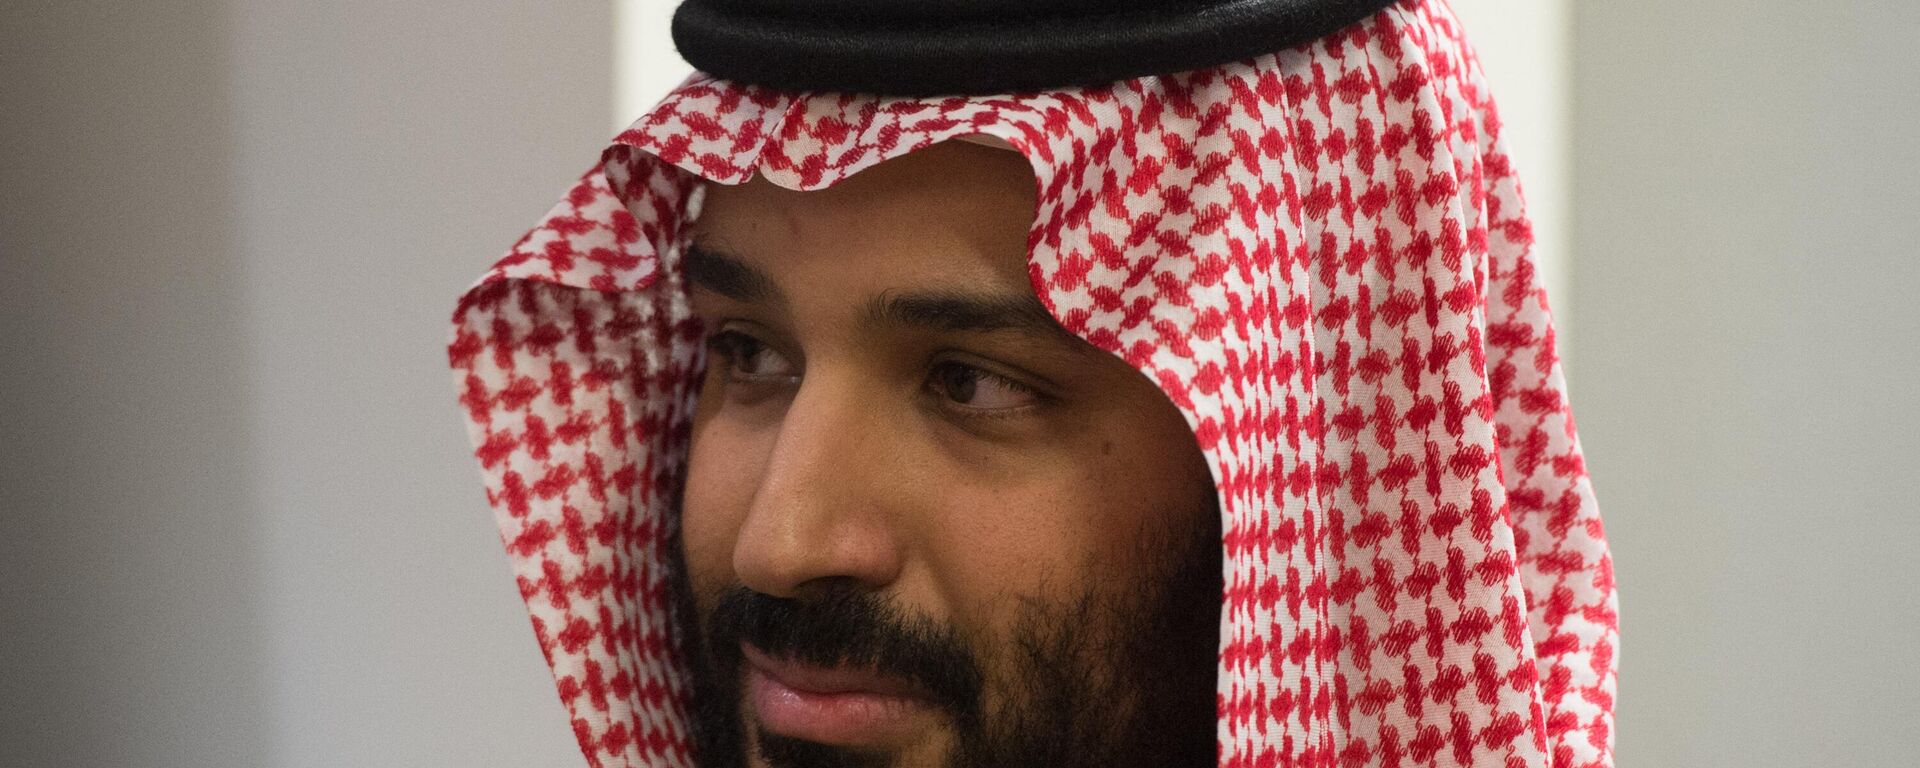 Prince Mohammed bin Salman Al Saud, Crown Prince, Kingdom of Saudi Arabia,  attends a meeting with the United Nations Secretary-General Antonio Guterres (out of frame) at the United Nations on March 27, 2018 in New York - Sputnik Africa, 1920, 17.04.2023